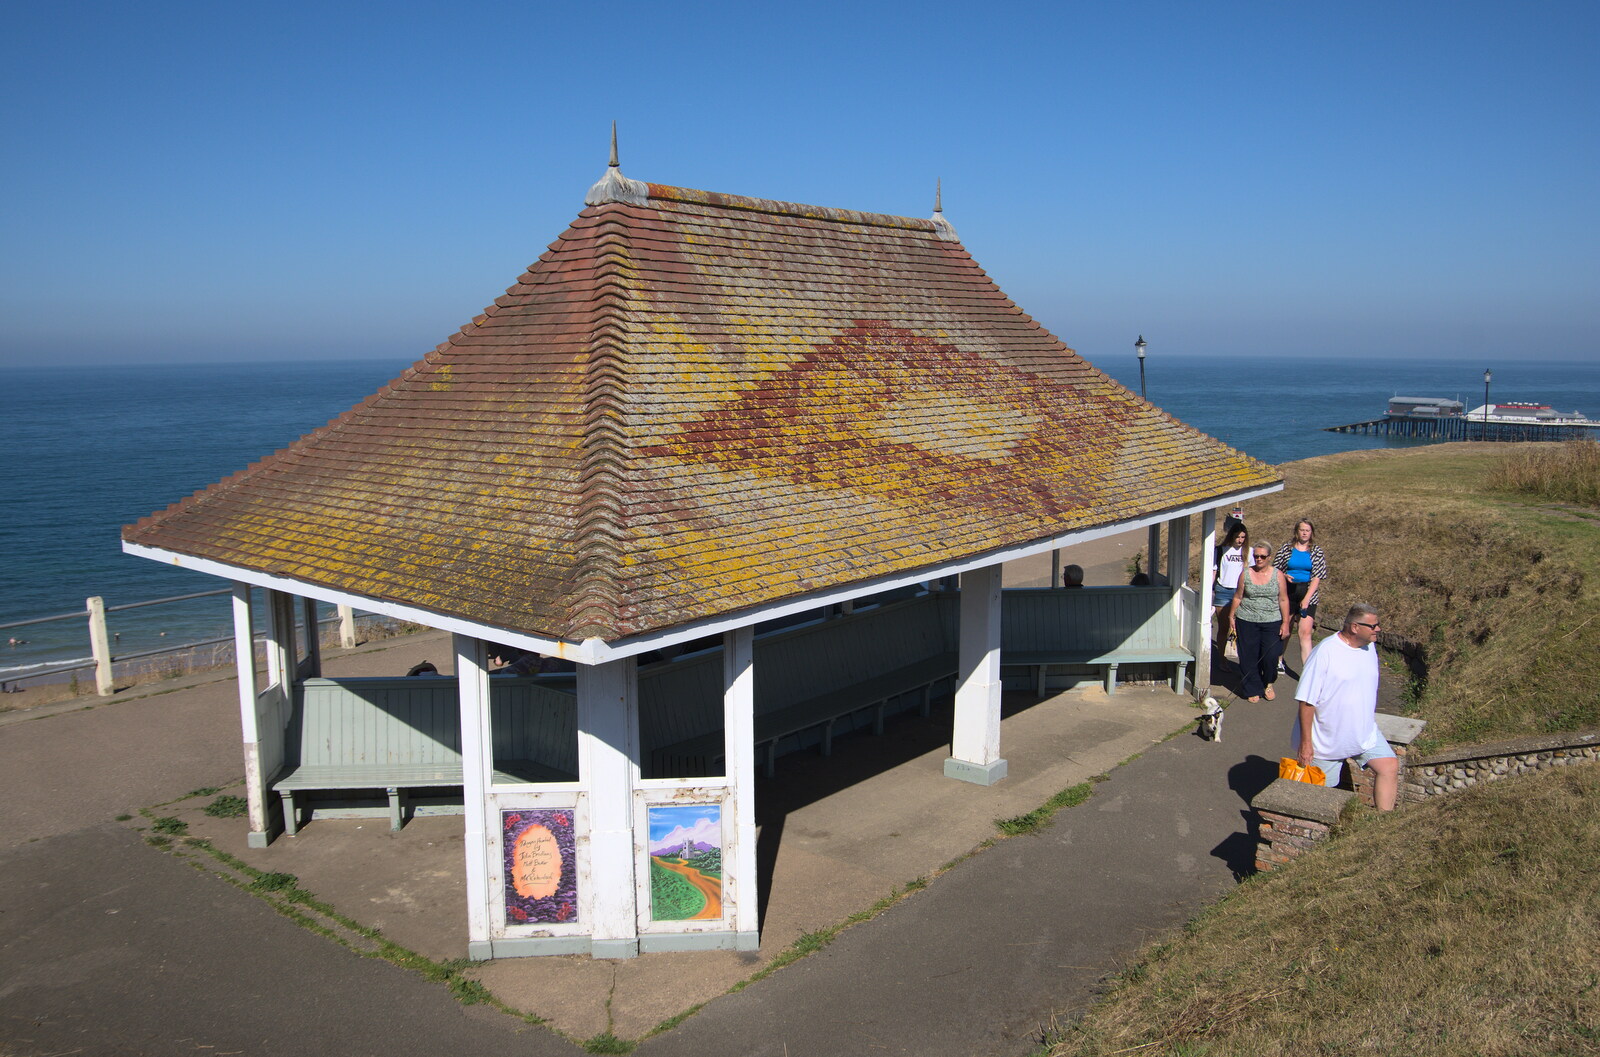 A cliff-top shelter from Camping at Forest Park, Cromer, Norfolk - 12th August 2022